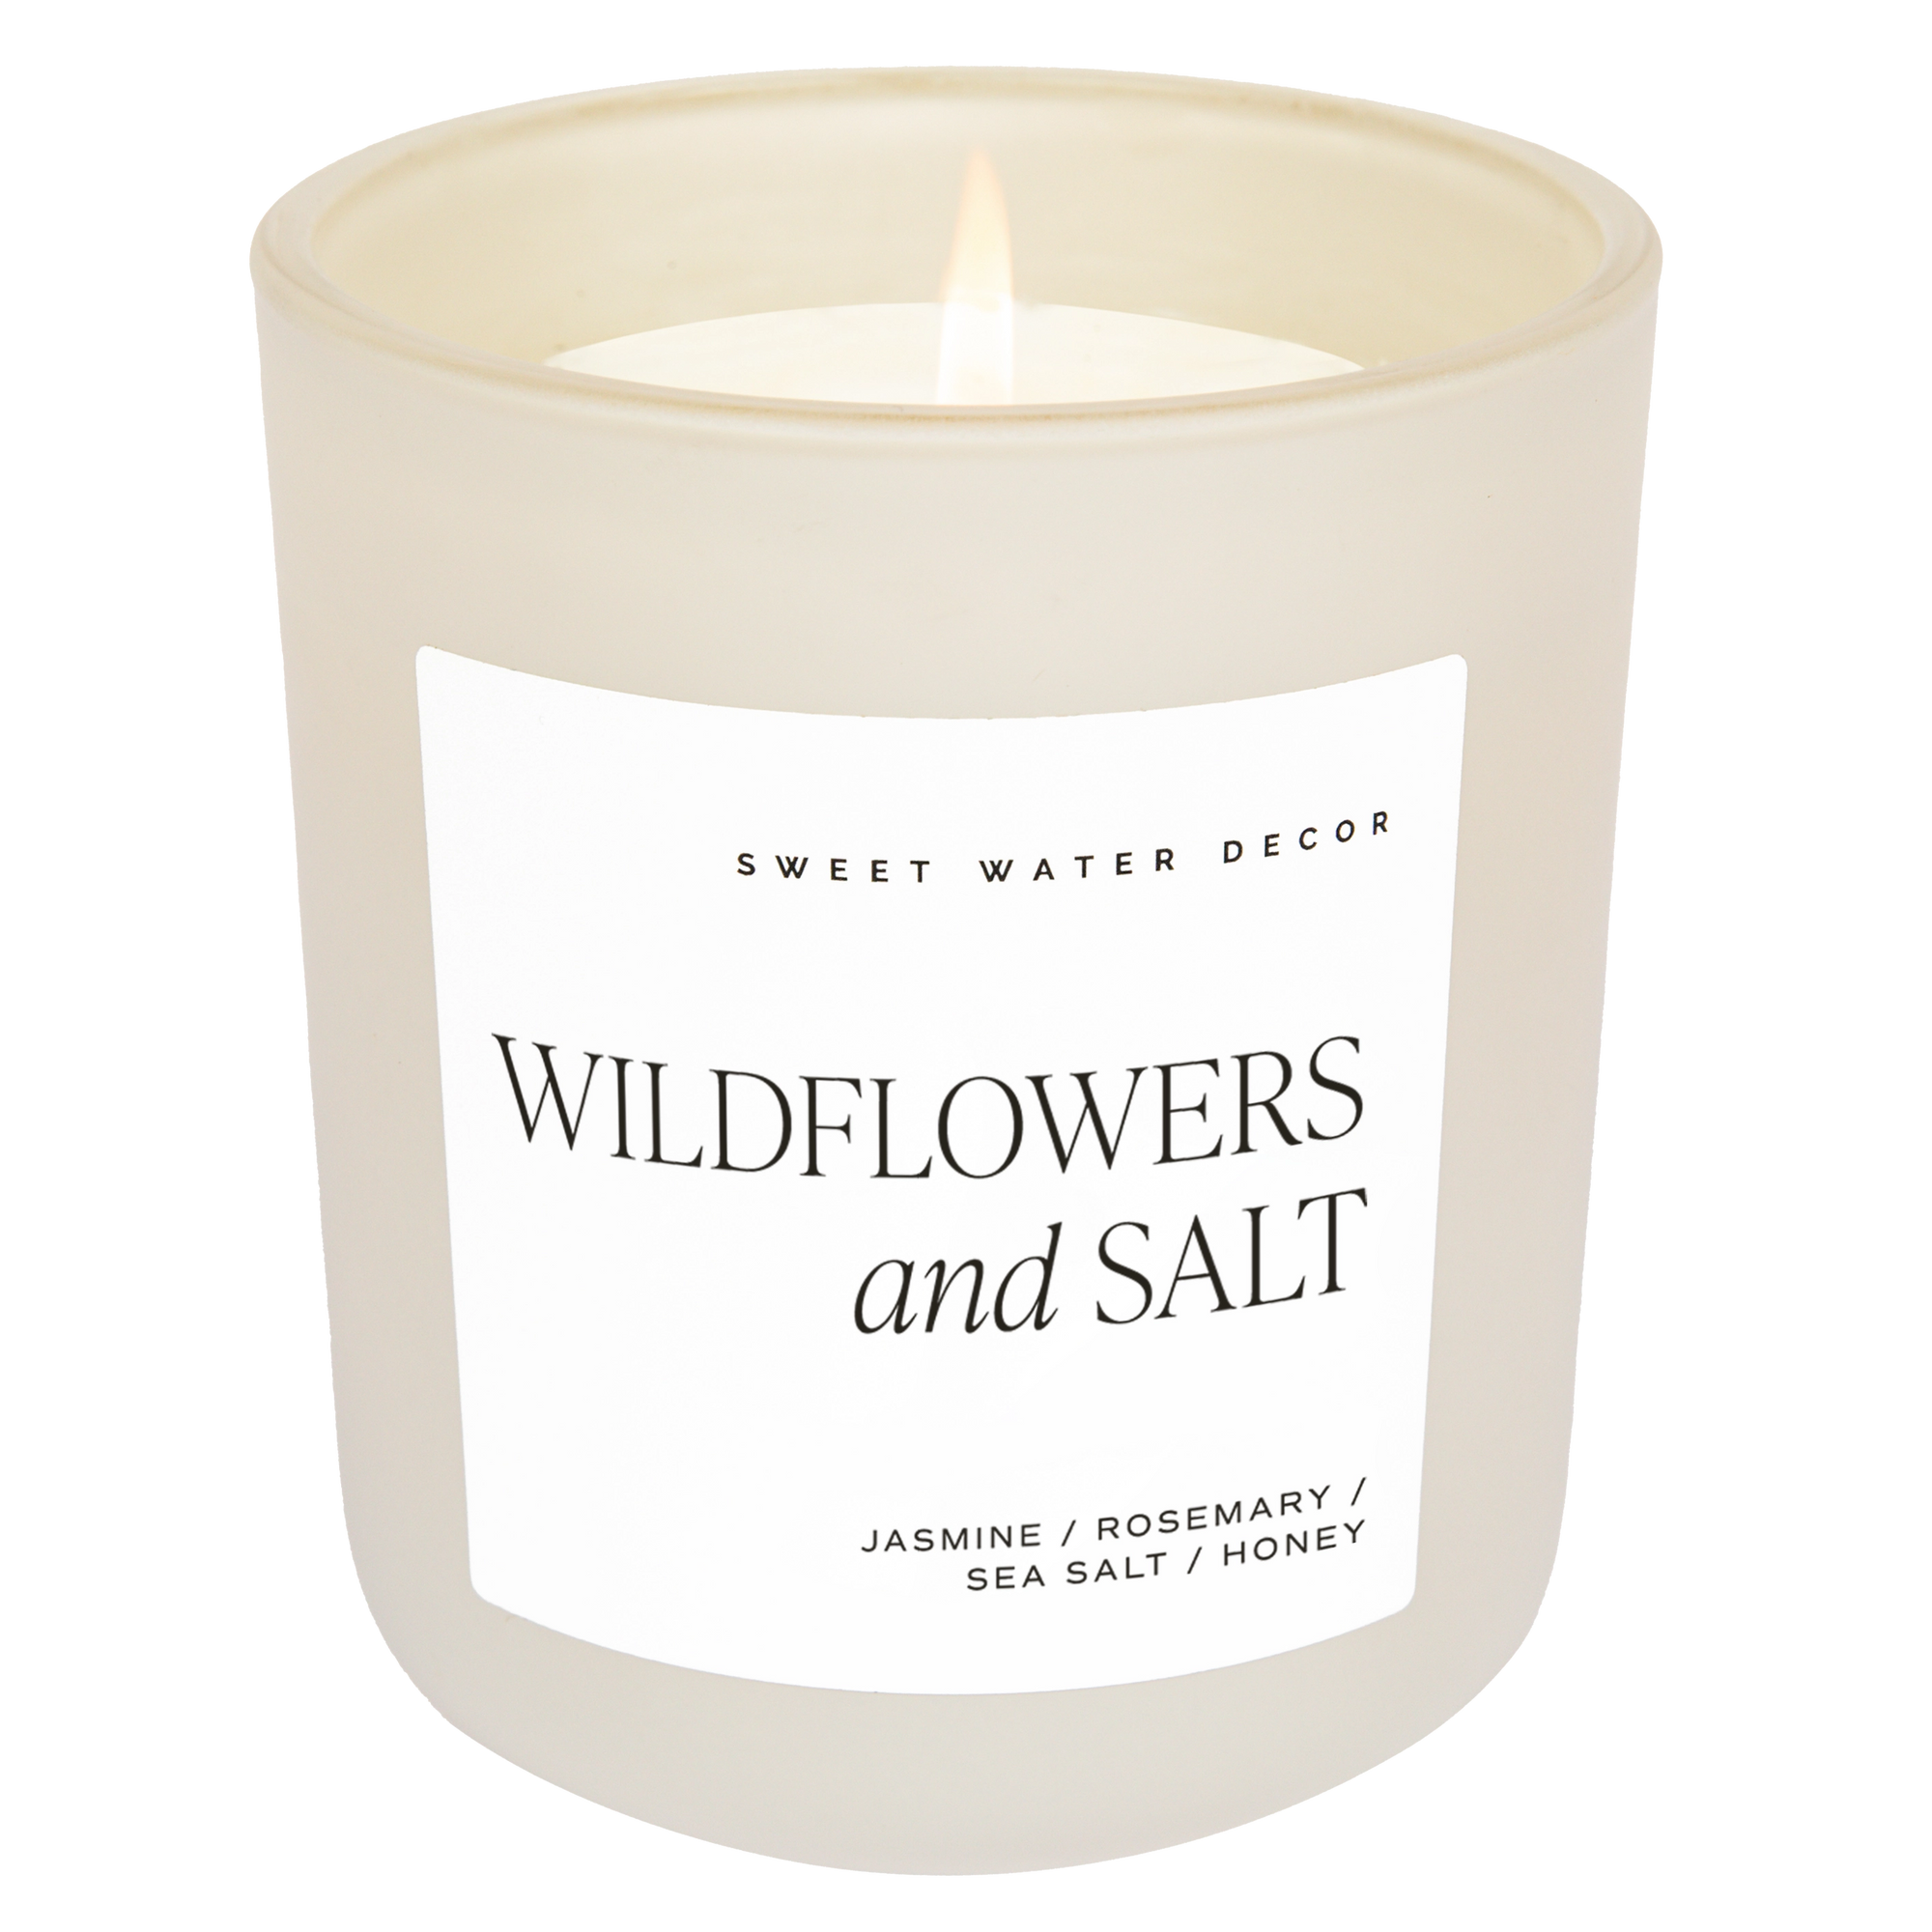 Wildflowers and salt soy candle in white matte jar.